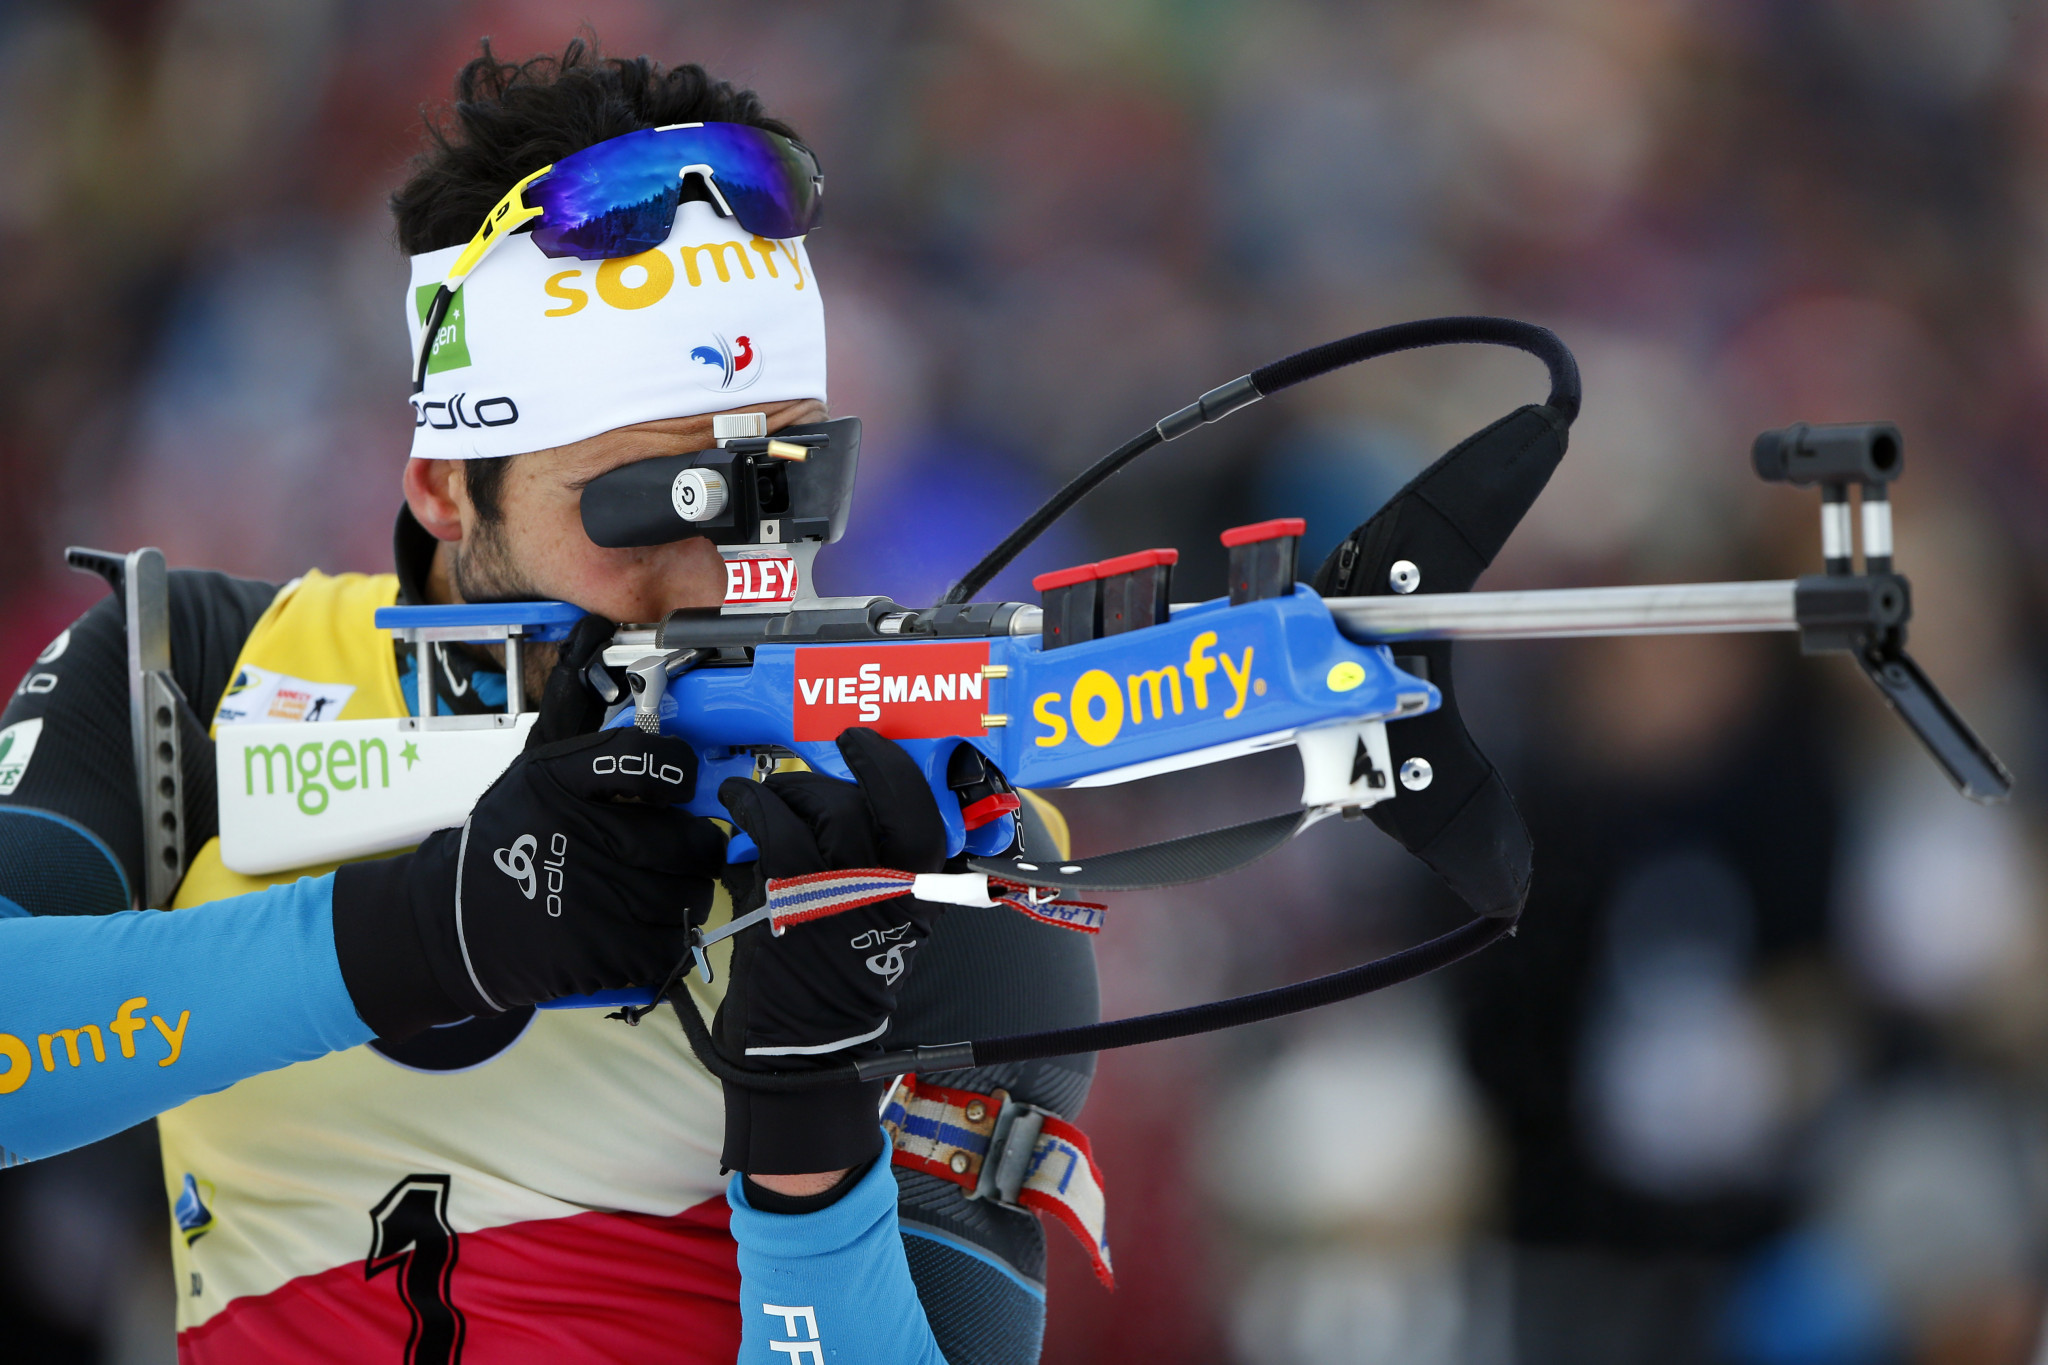 Martin Fourcade of France is a major name in the sport of biathlon ©Getty Images